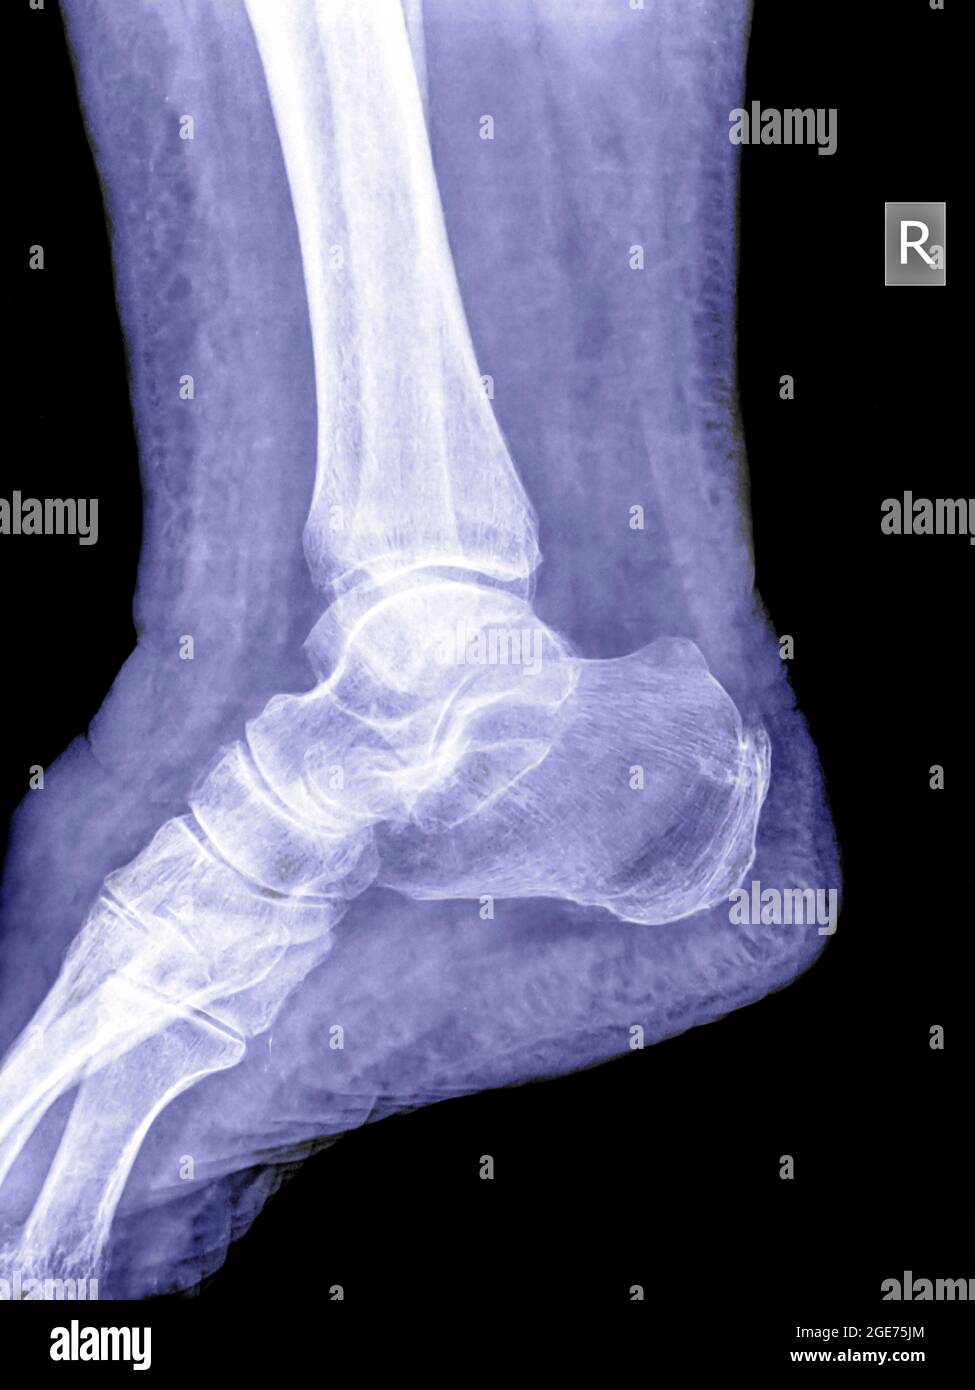 File:X-ray of a normal foot of a 12 year old male - lateral.jpg